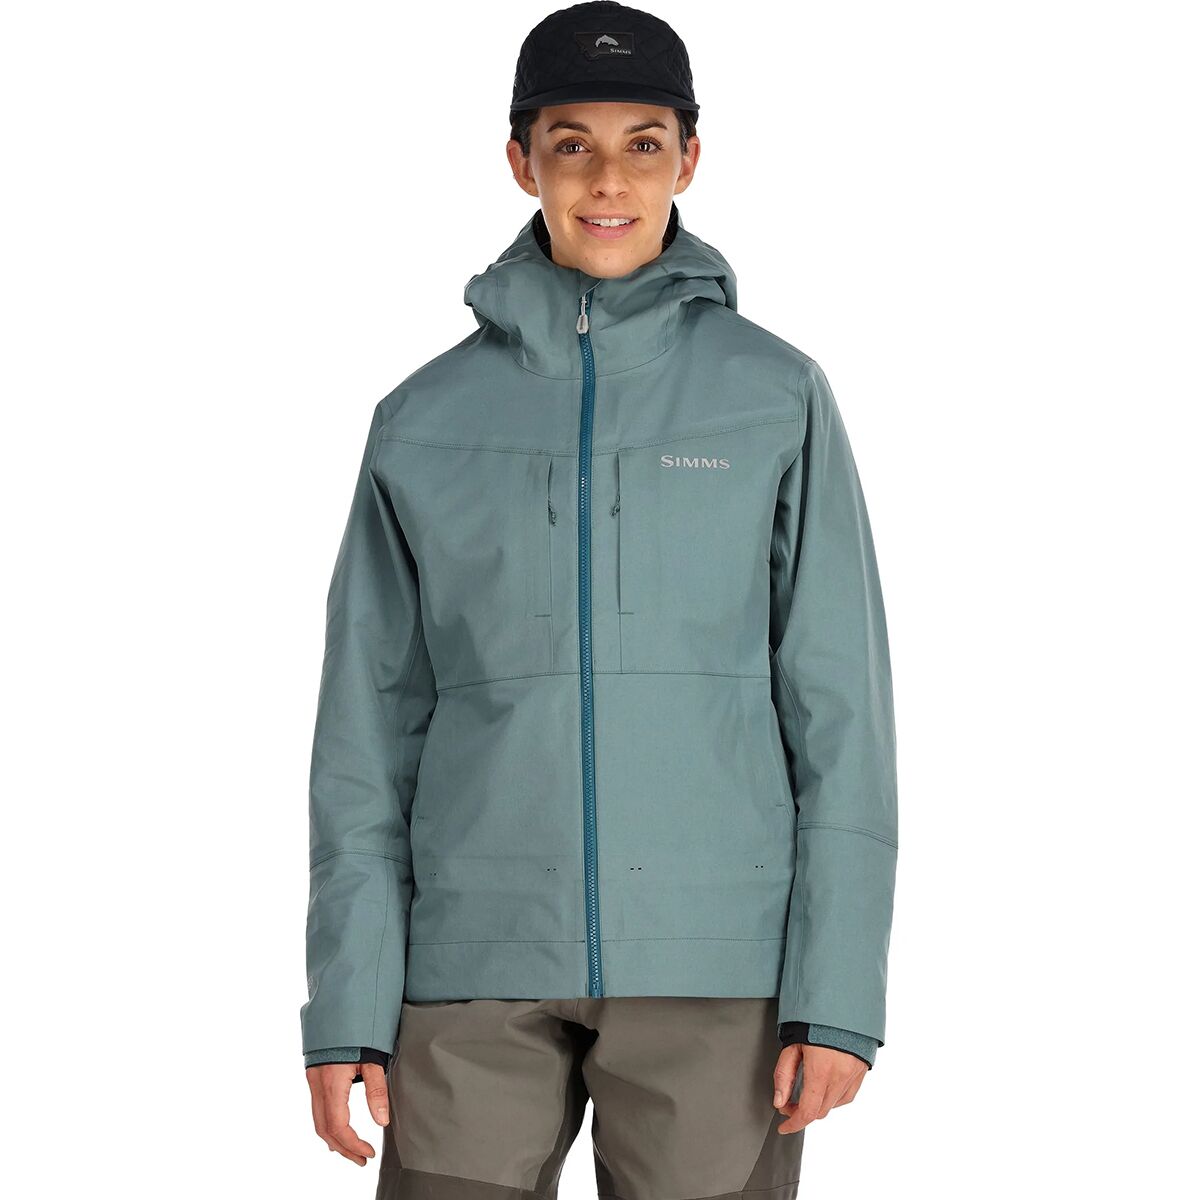 Simms G3 Guide Wading Jacket - Women's